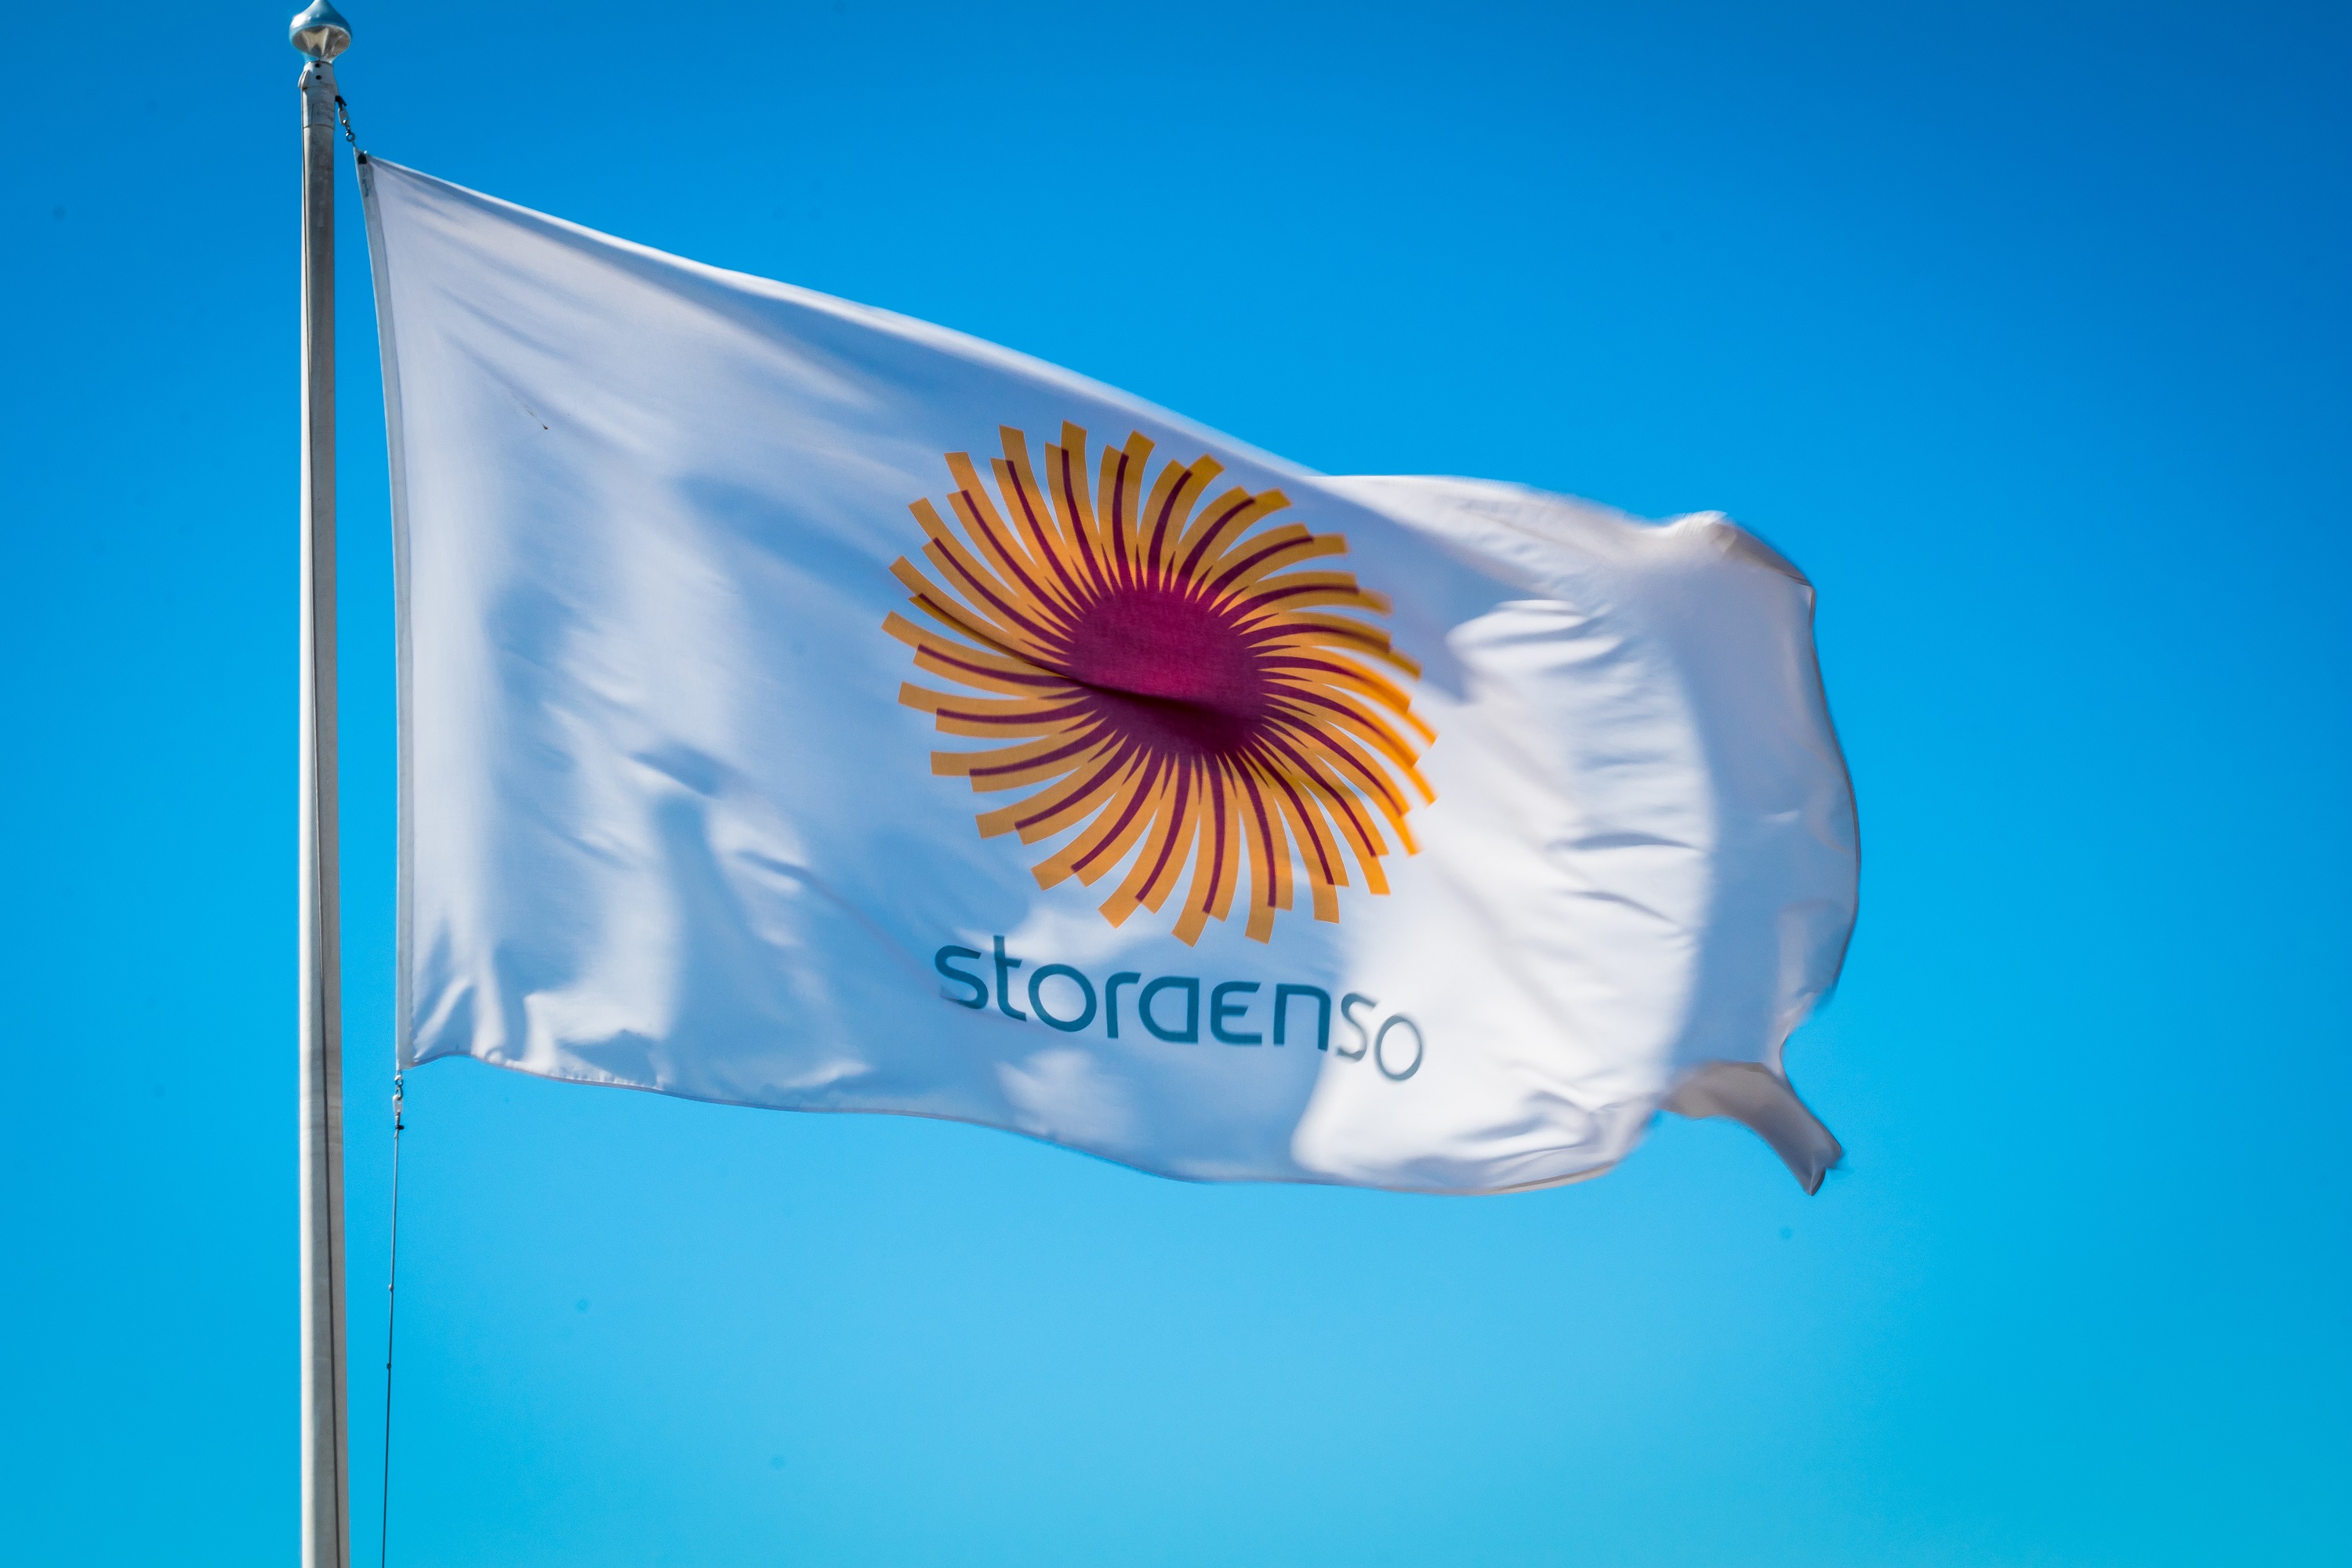 Stora Enso plans production of plastic-free formed fibre products at Hylte